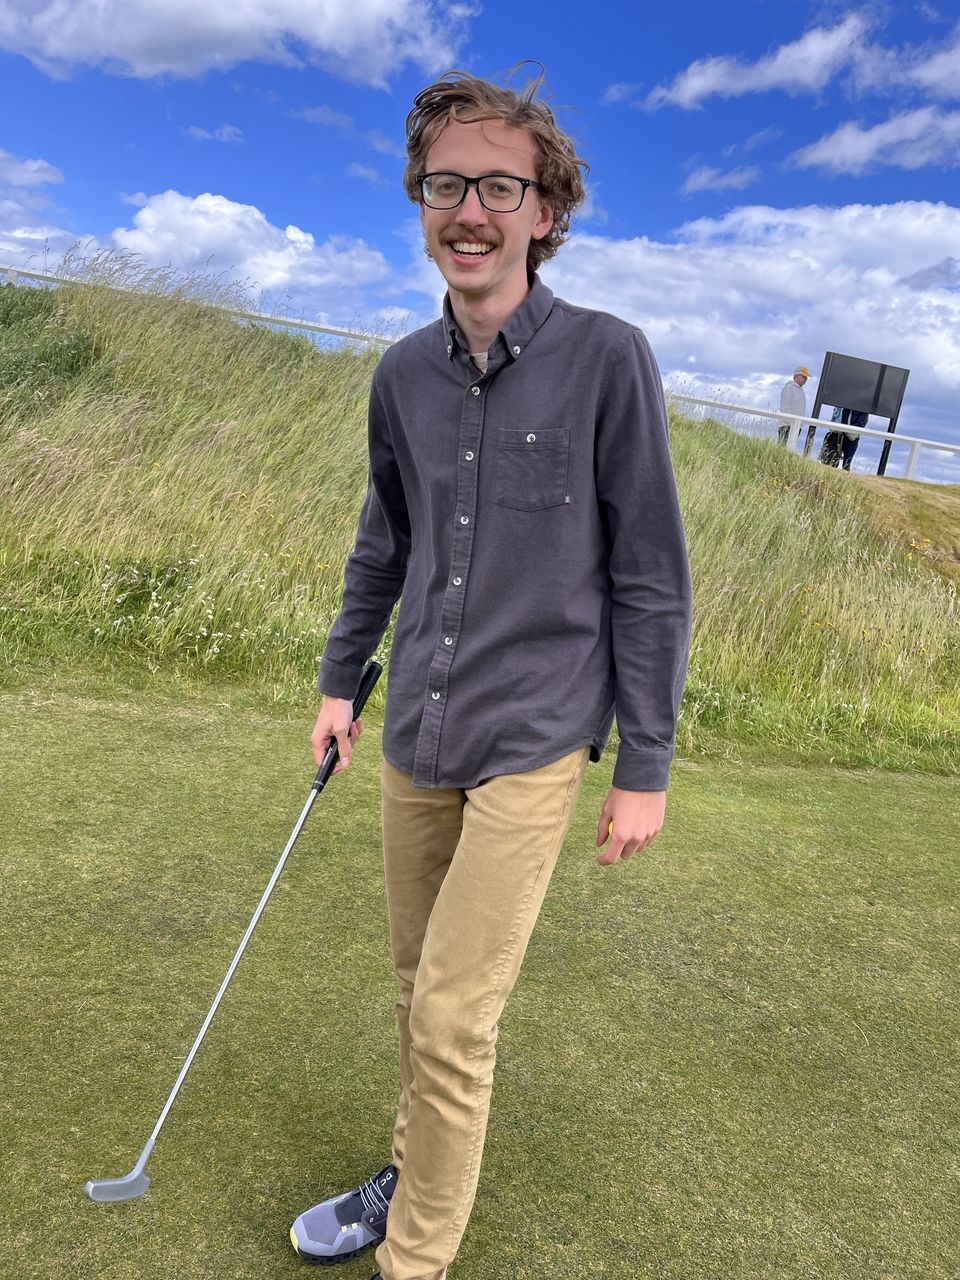 Student with golf club playing at St Andrews Golf Course